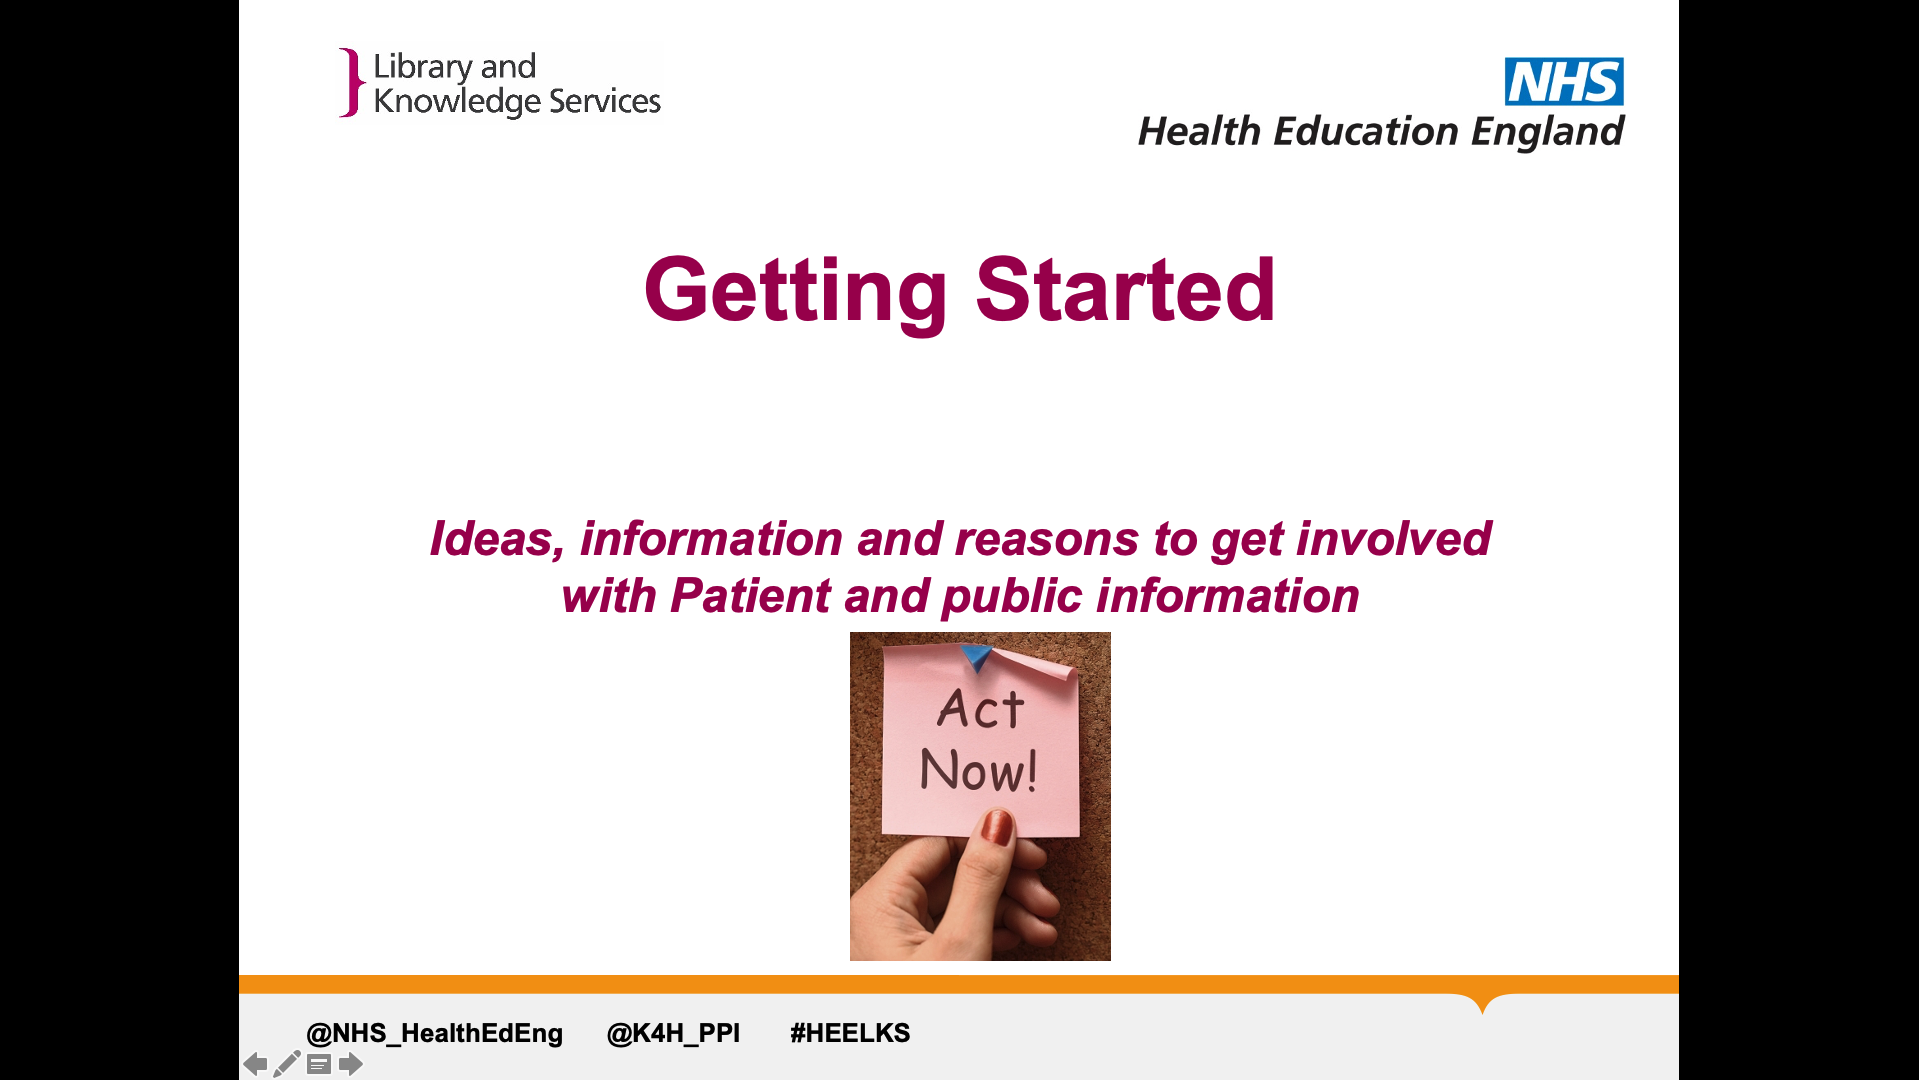 Title: Getting started. Subtitle: Ideas, information, and reasons to get involved with Patient and public information